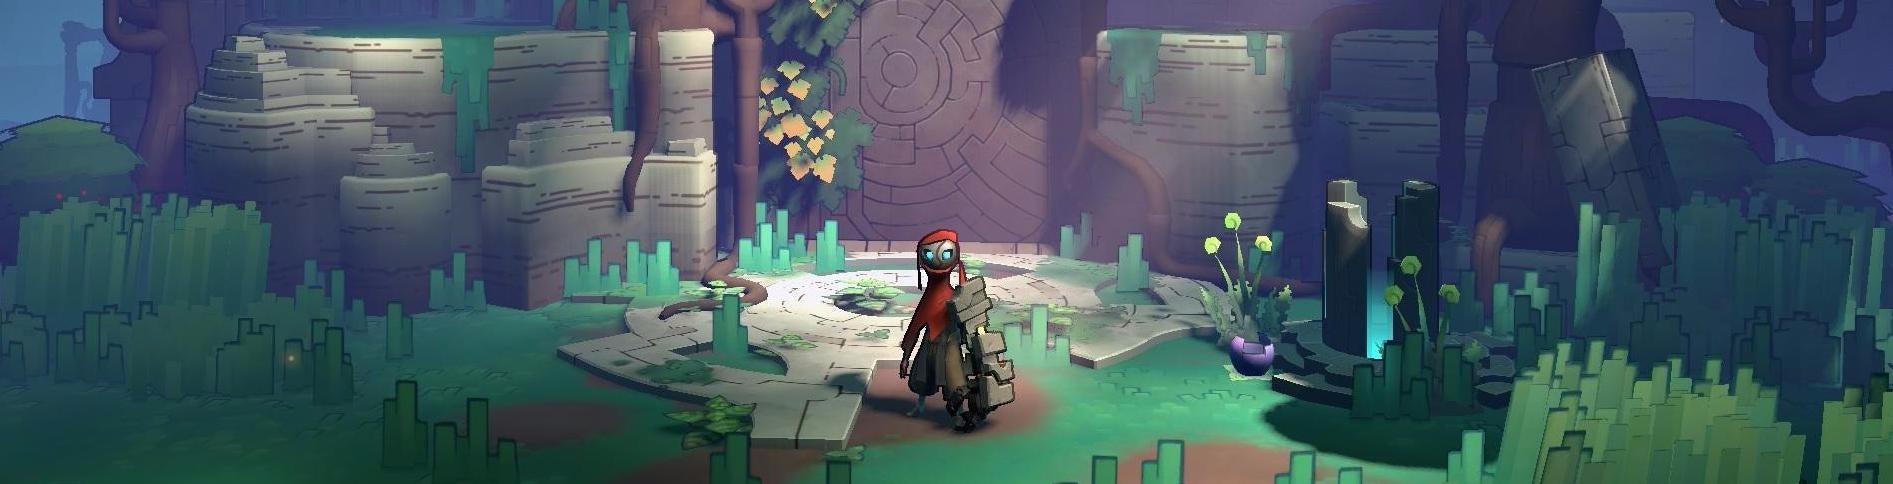 Image for Hob sees the makers of Torchlight trading Diablo for Zelda